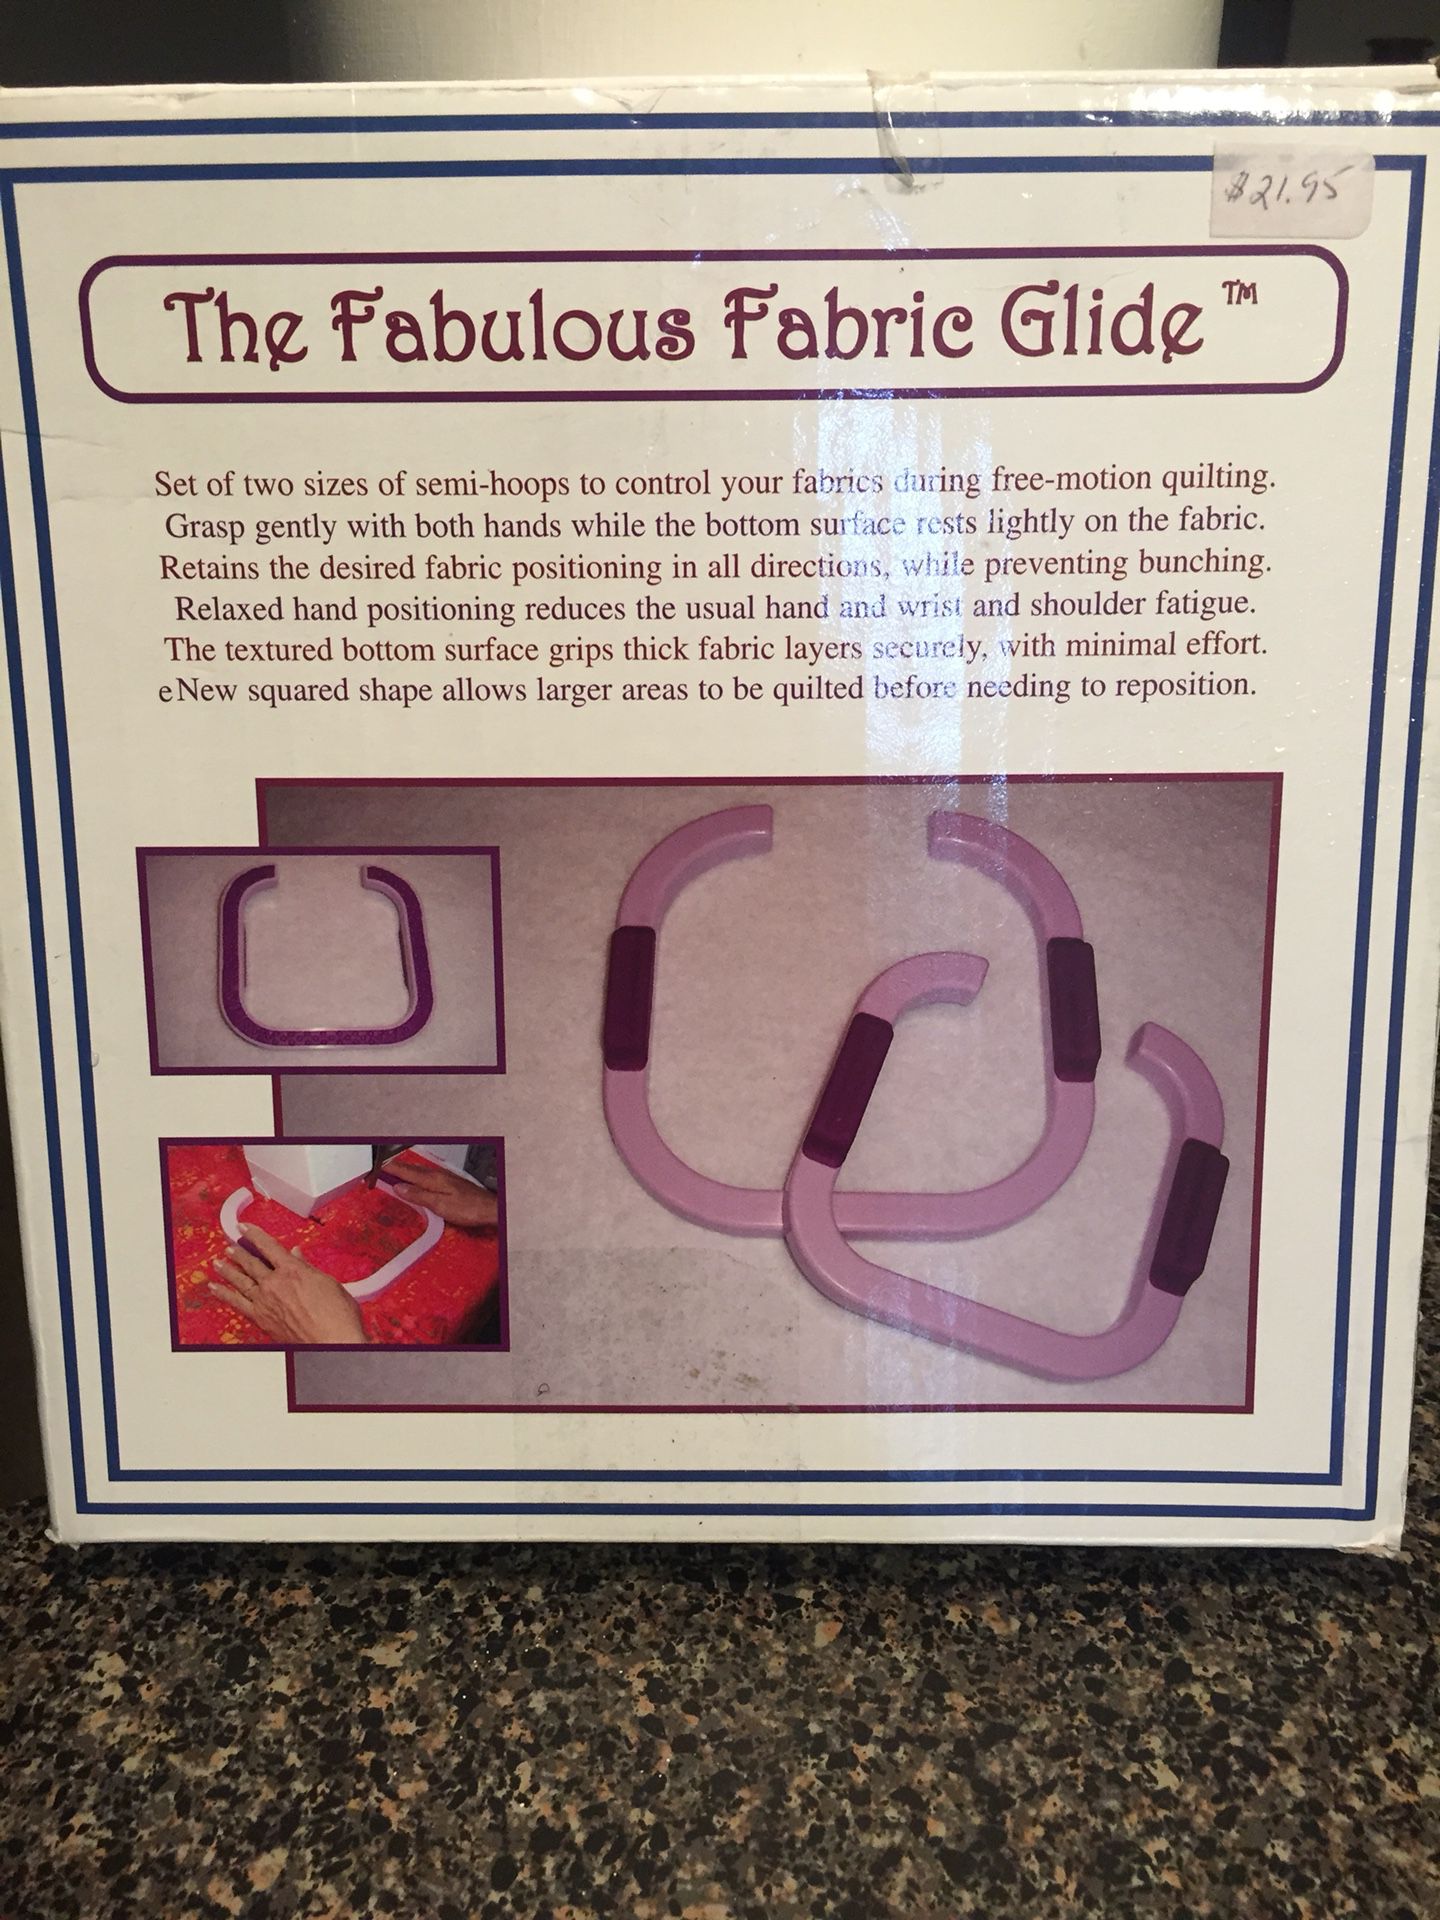 The Fabulous Fabric Guide New &Sealed